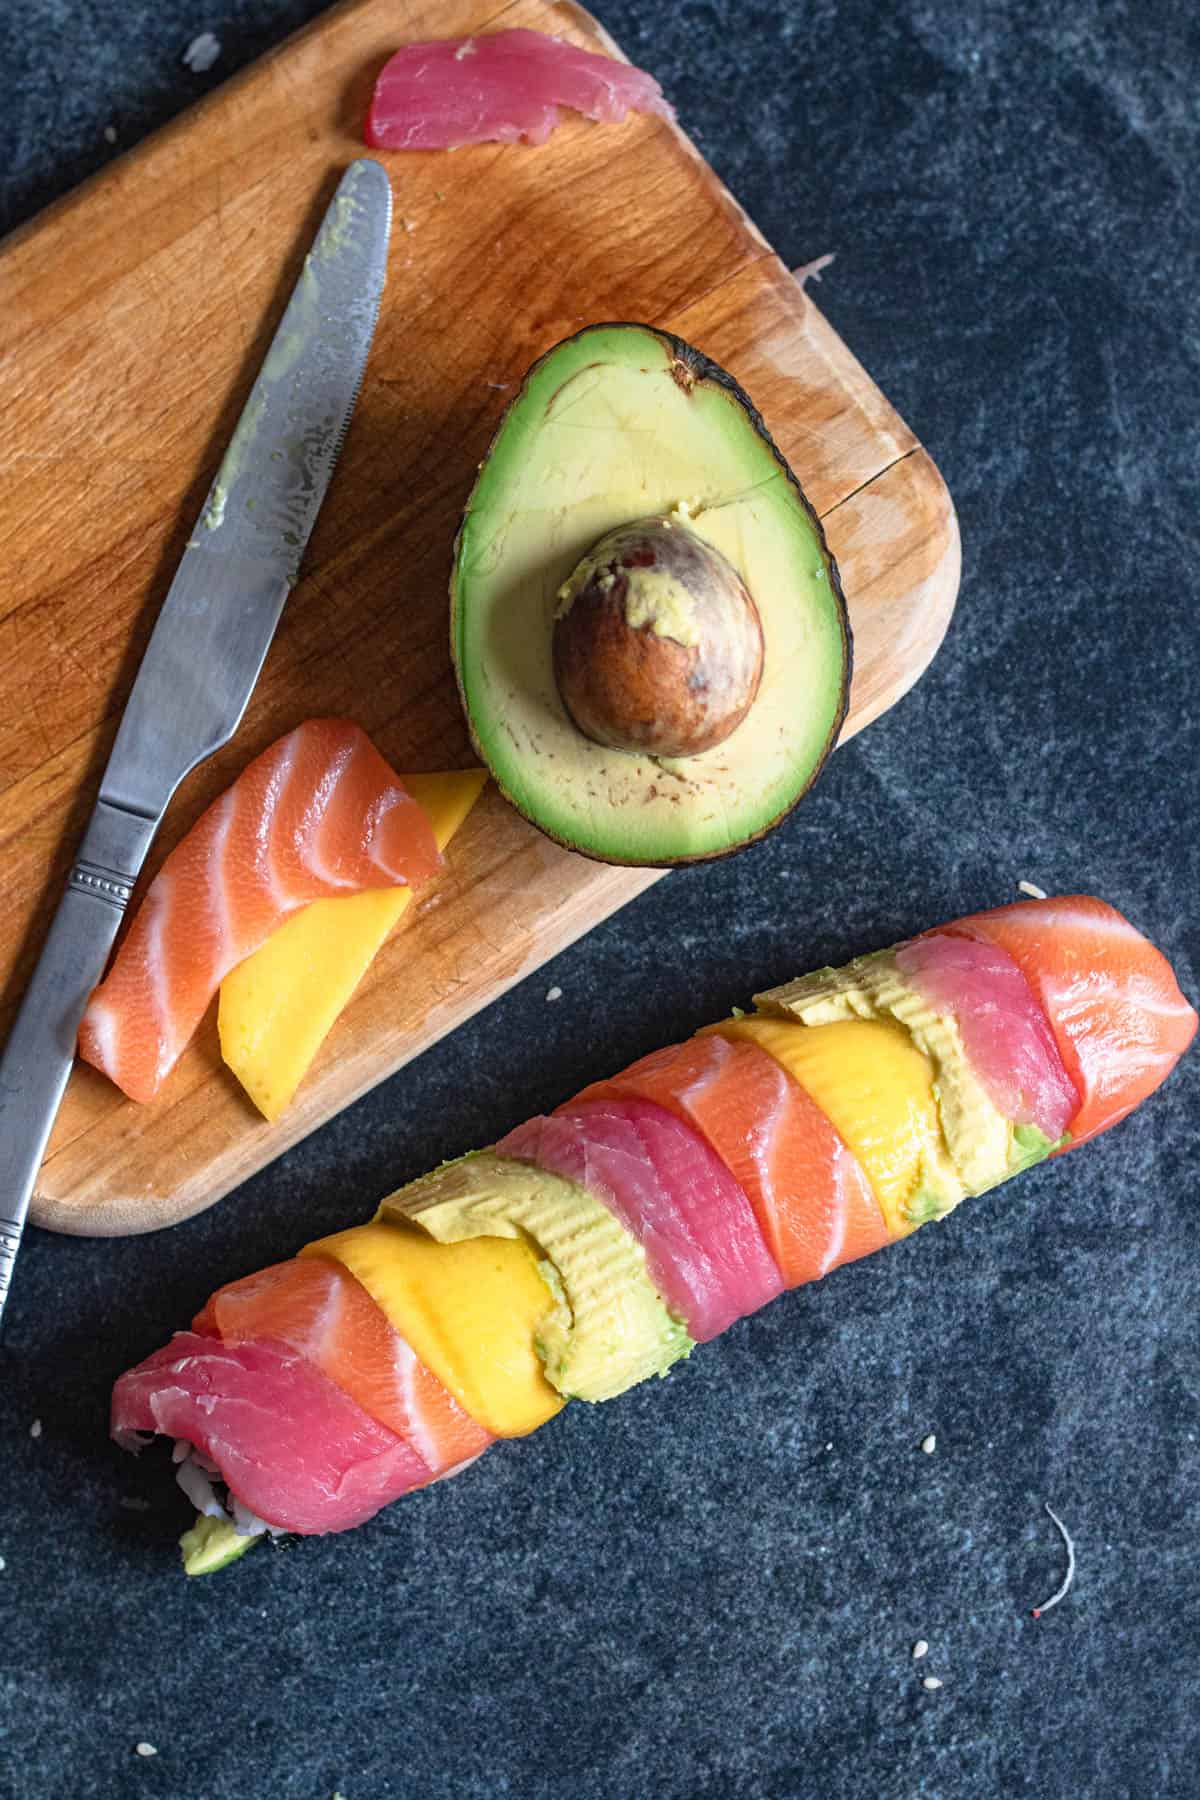 Rainbow Roll Sushi - A Japanese Creation! - The Foreign Fork